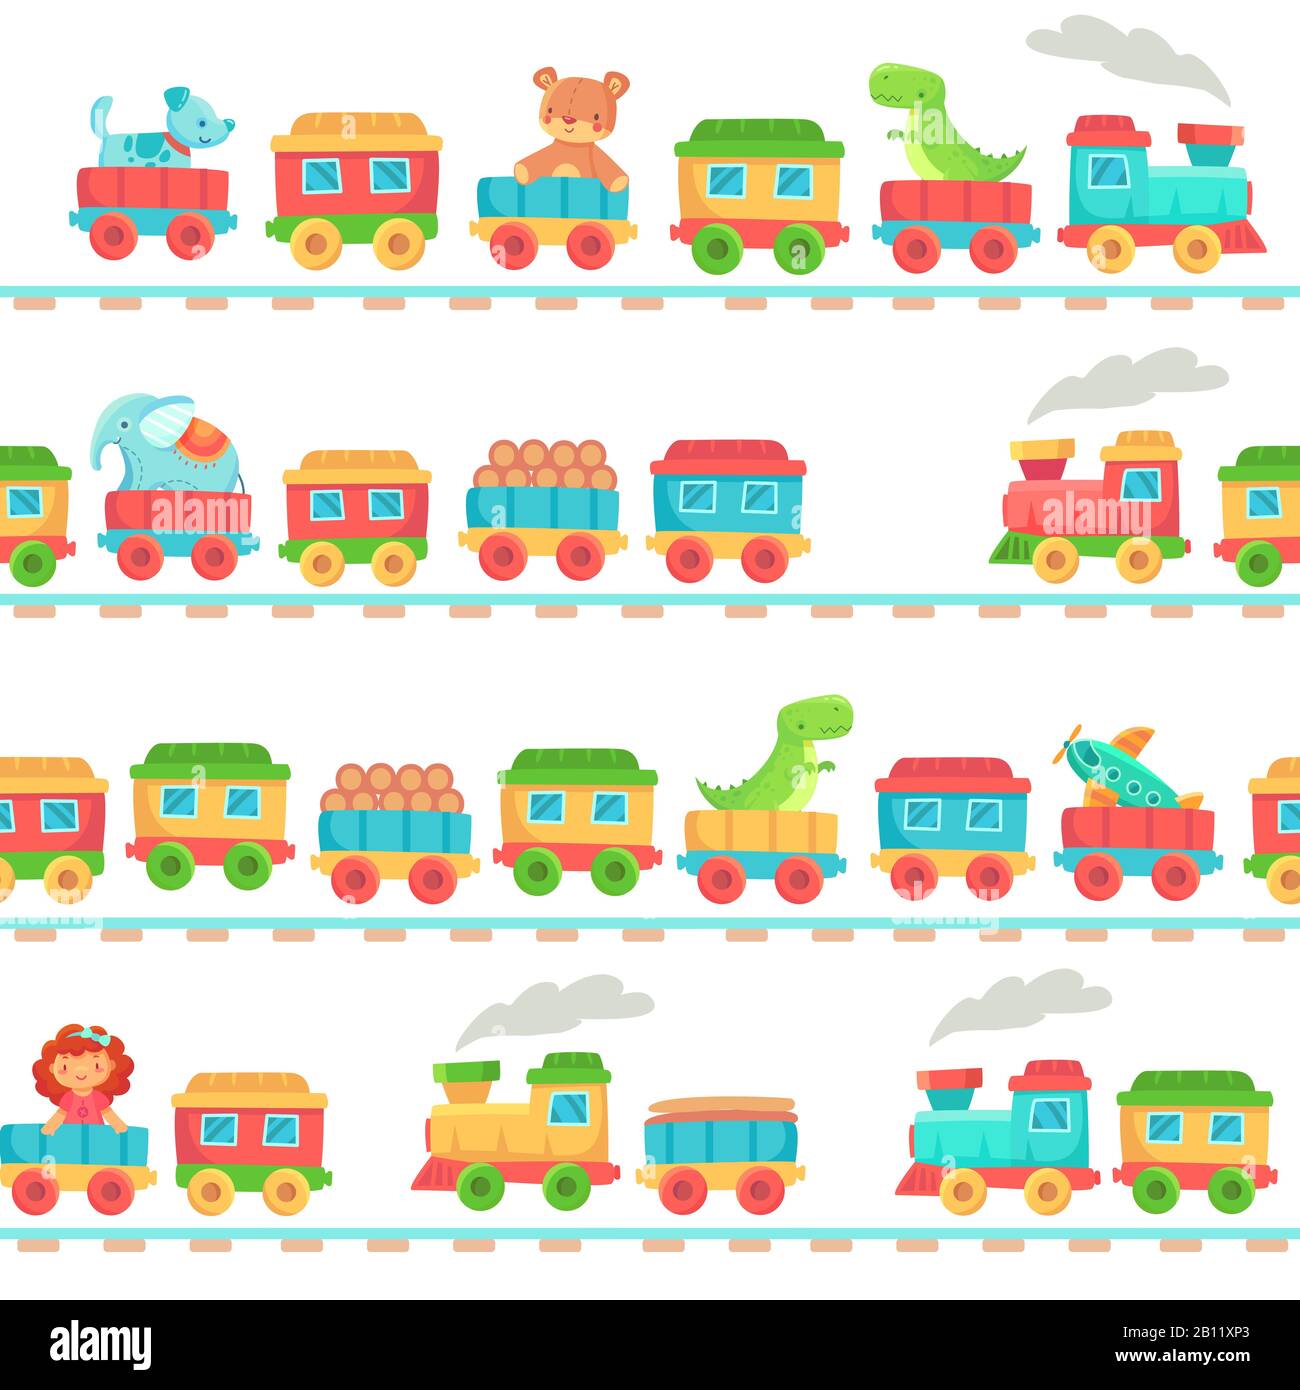 Kids toy train pattern. Children railroad toys, baby trains transport on rails and kid railway seamless vector illustration Stock Vector